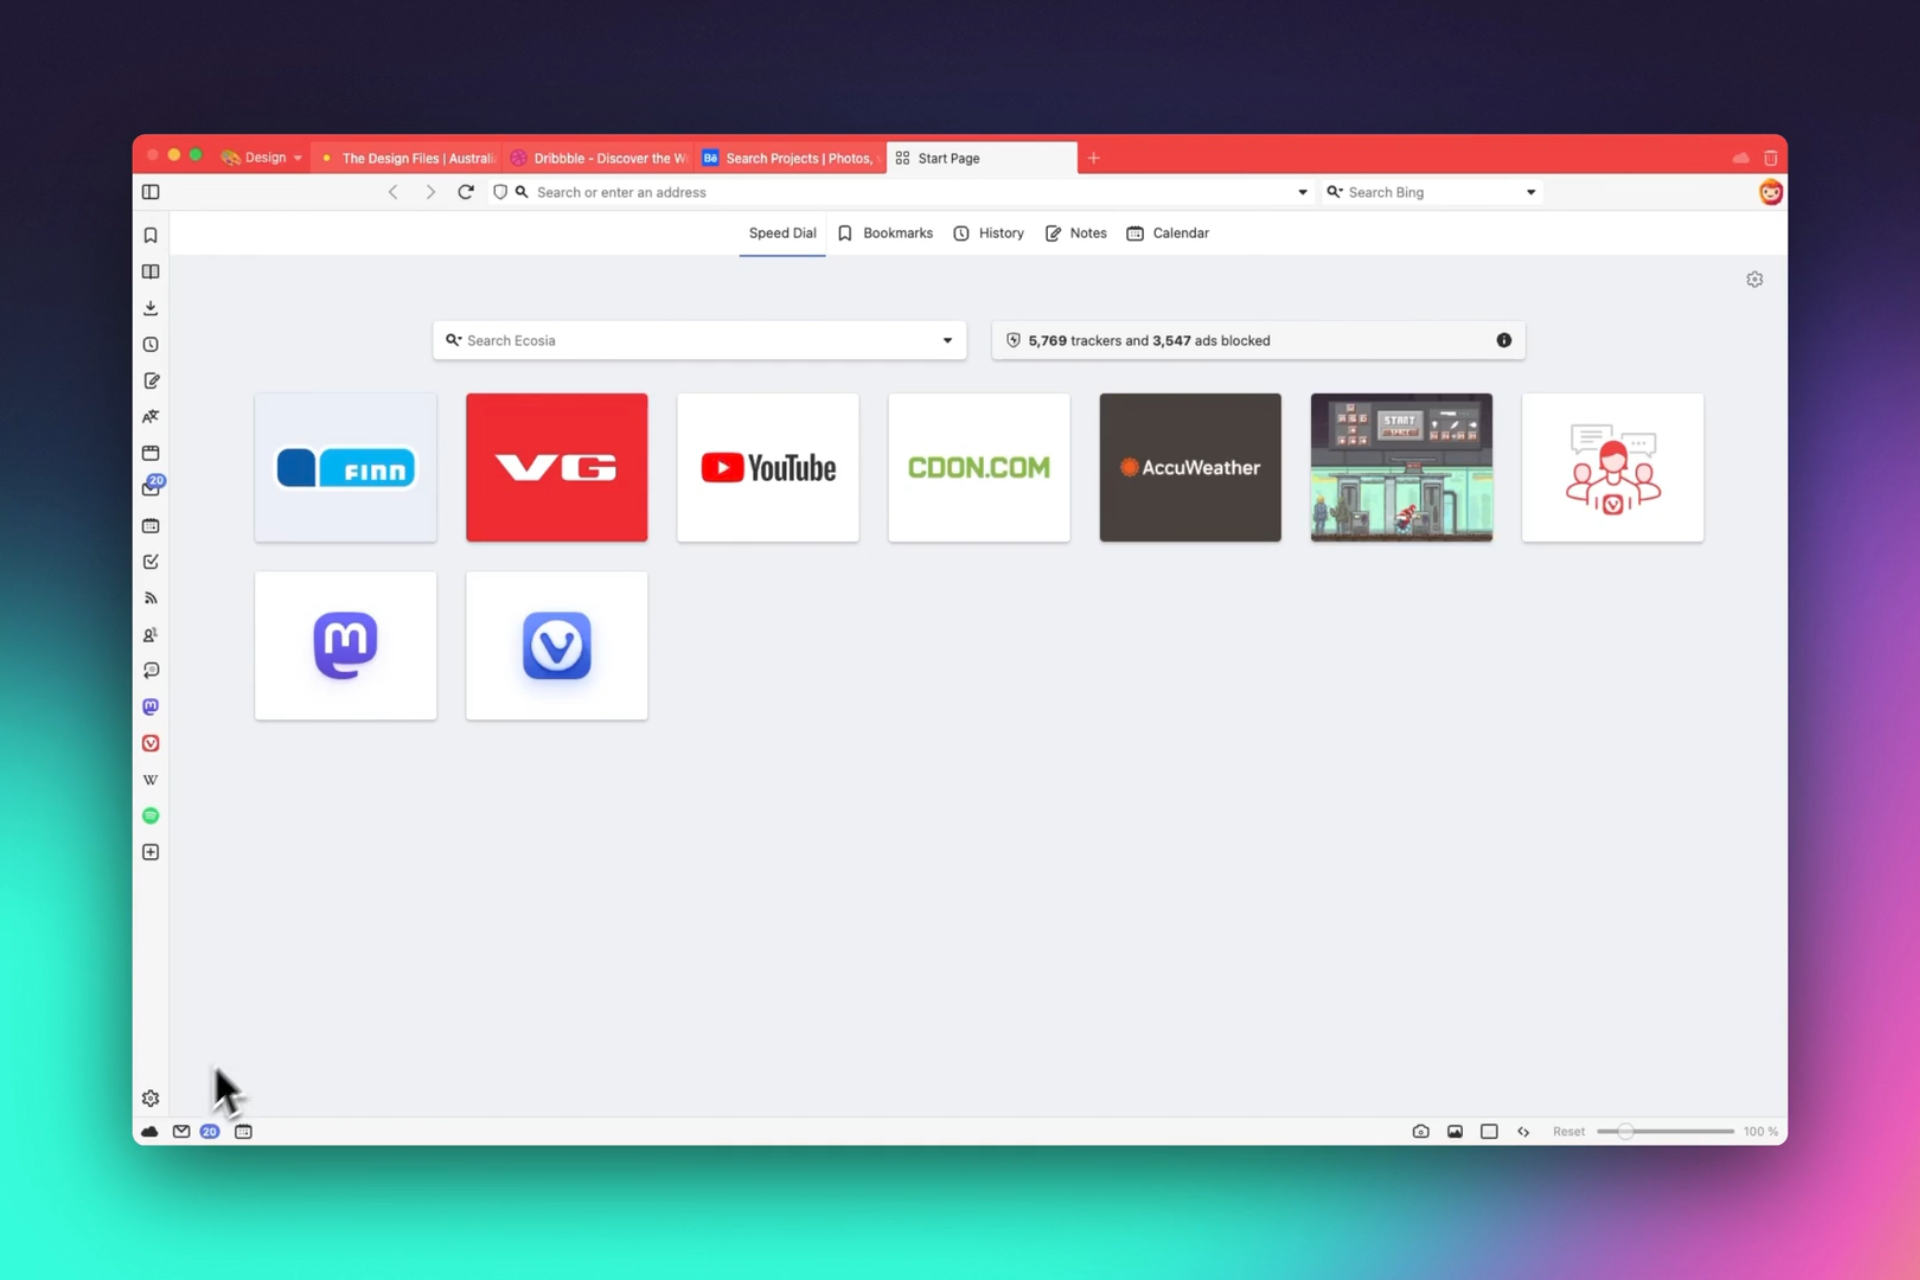 Vivaldi started updating their browser for the upcoming fleet of ARM-basted laptops